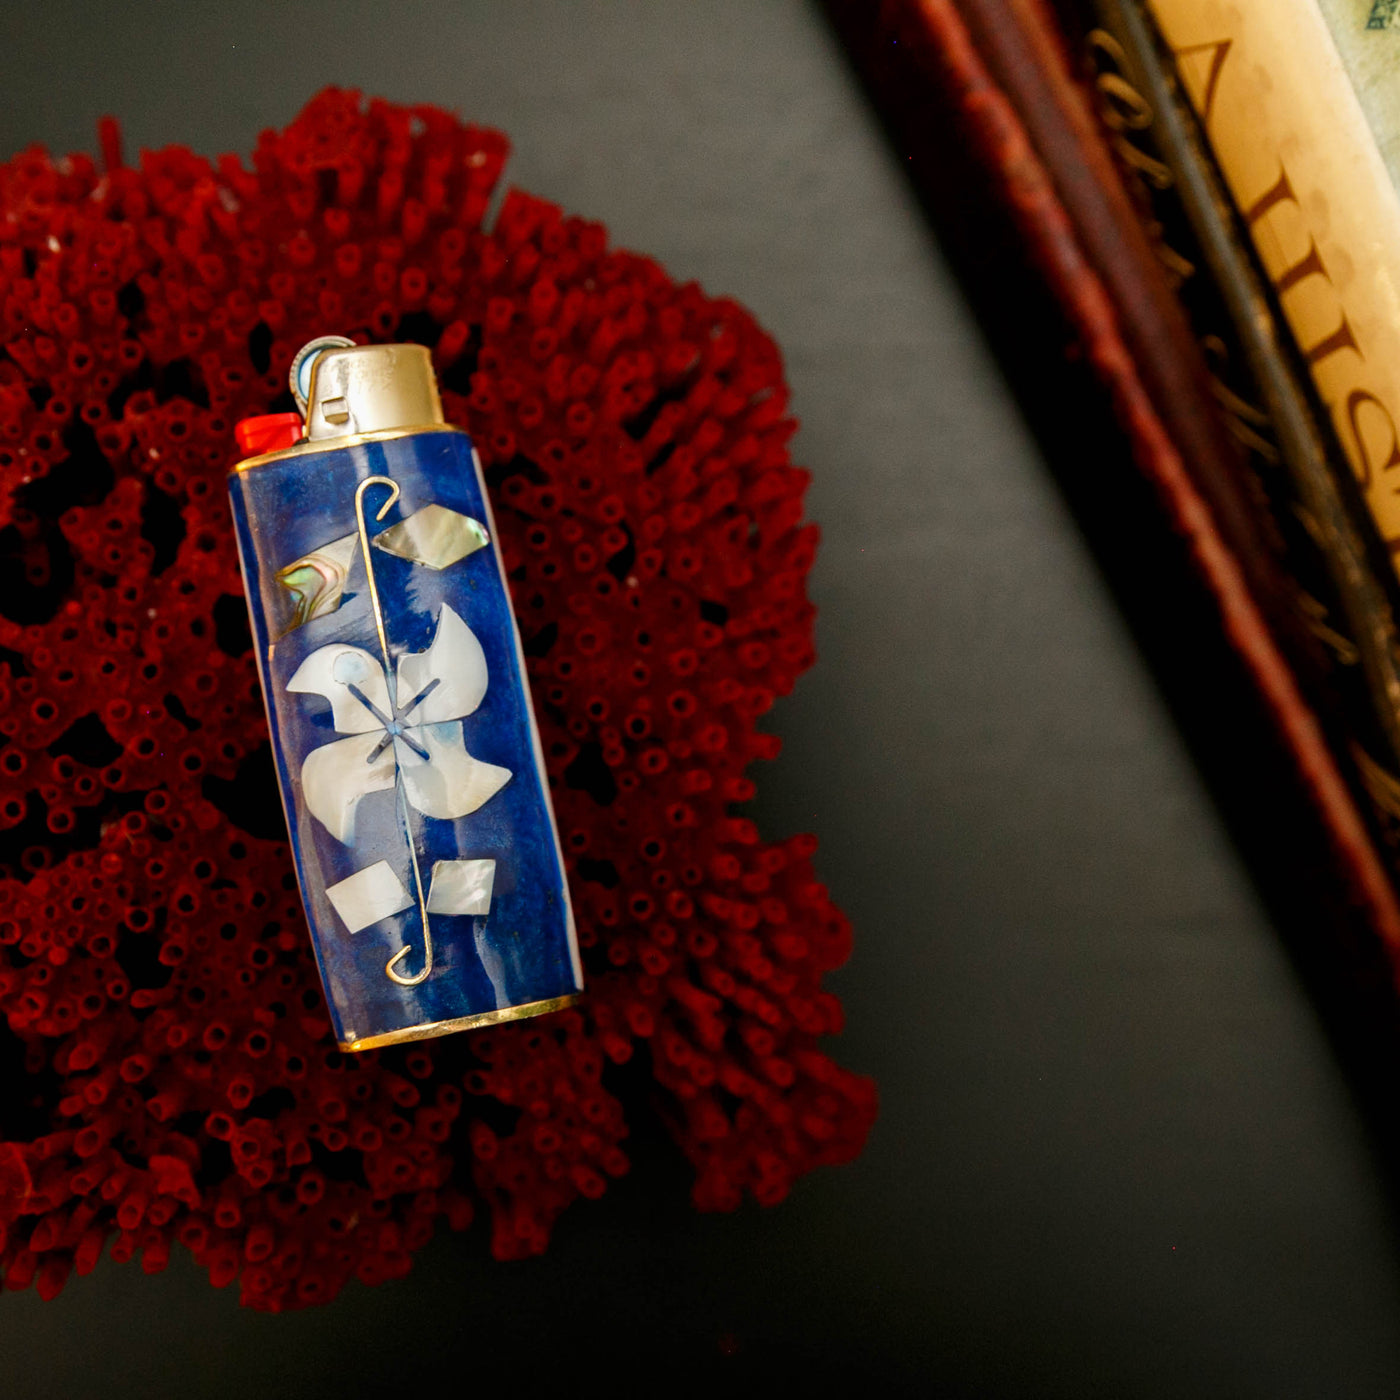 Dark Blue Flower Vintage Lighter Case from the Saint Claude Social Club Vintage Collection and home goods section.